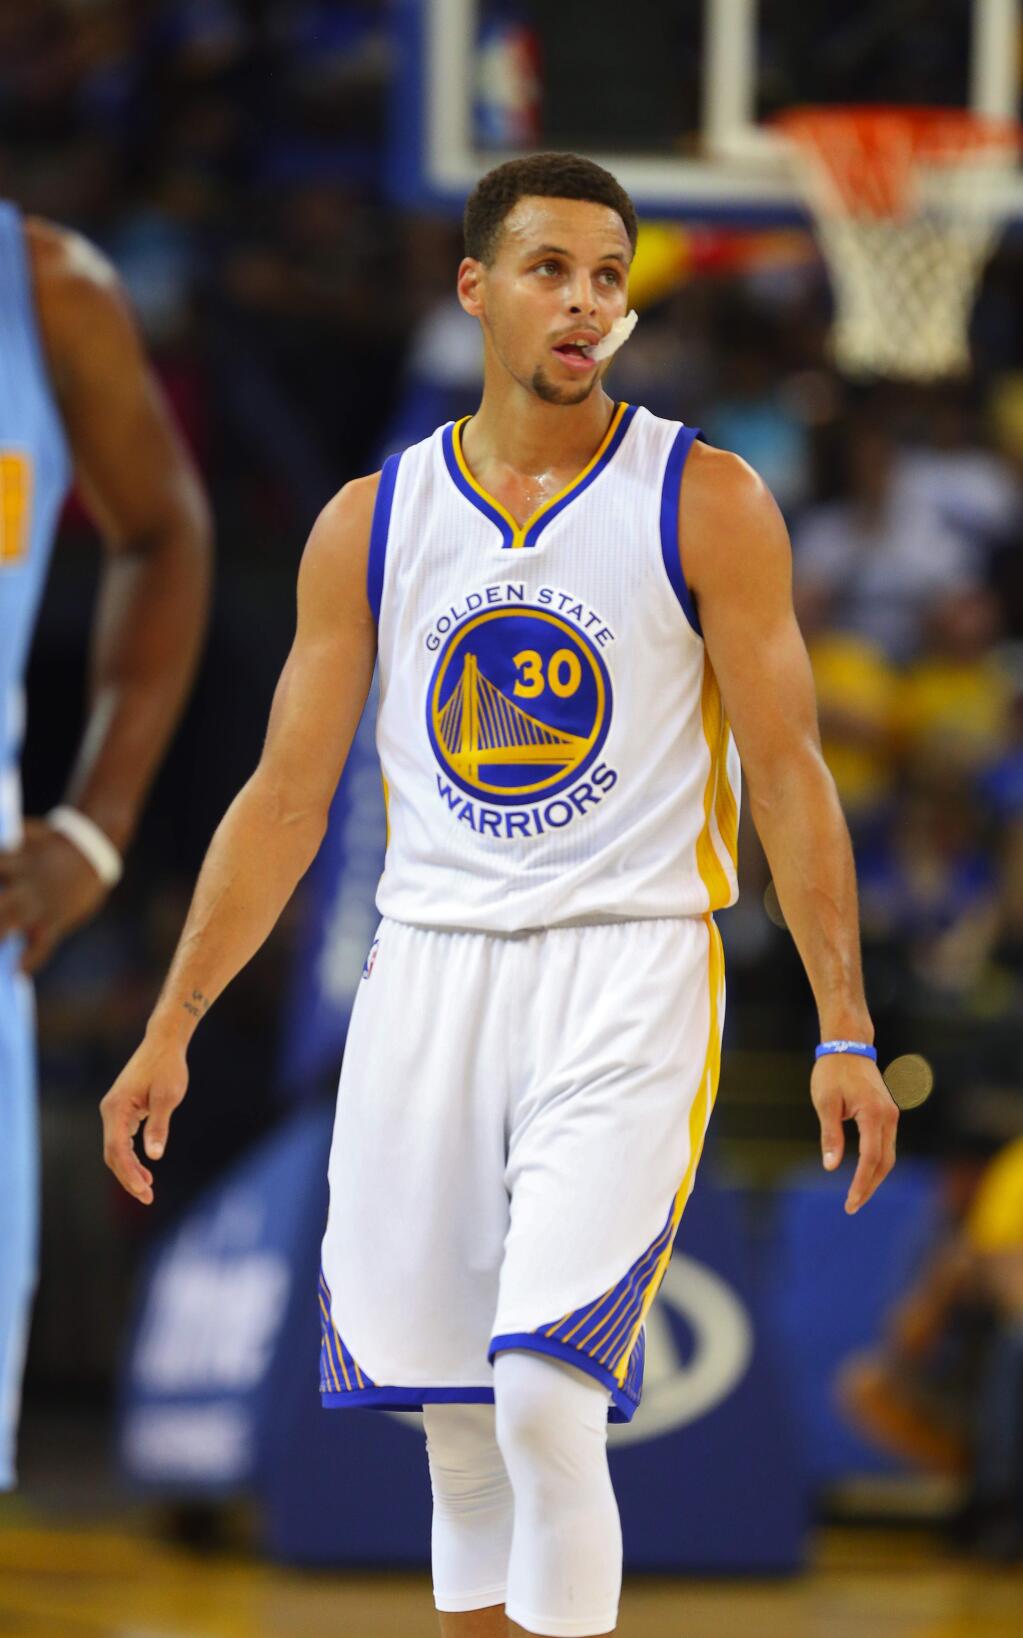 Warriors guard Stephen Curry walks down the court with his mouthguard hanging from his mouth, during the game against the Denver Nuggets, in Oakland, on Tuesday, October 13, 2015. (Christopher Chung/ The Press Democrat)